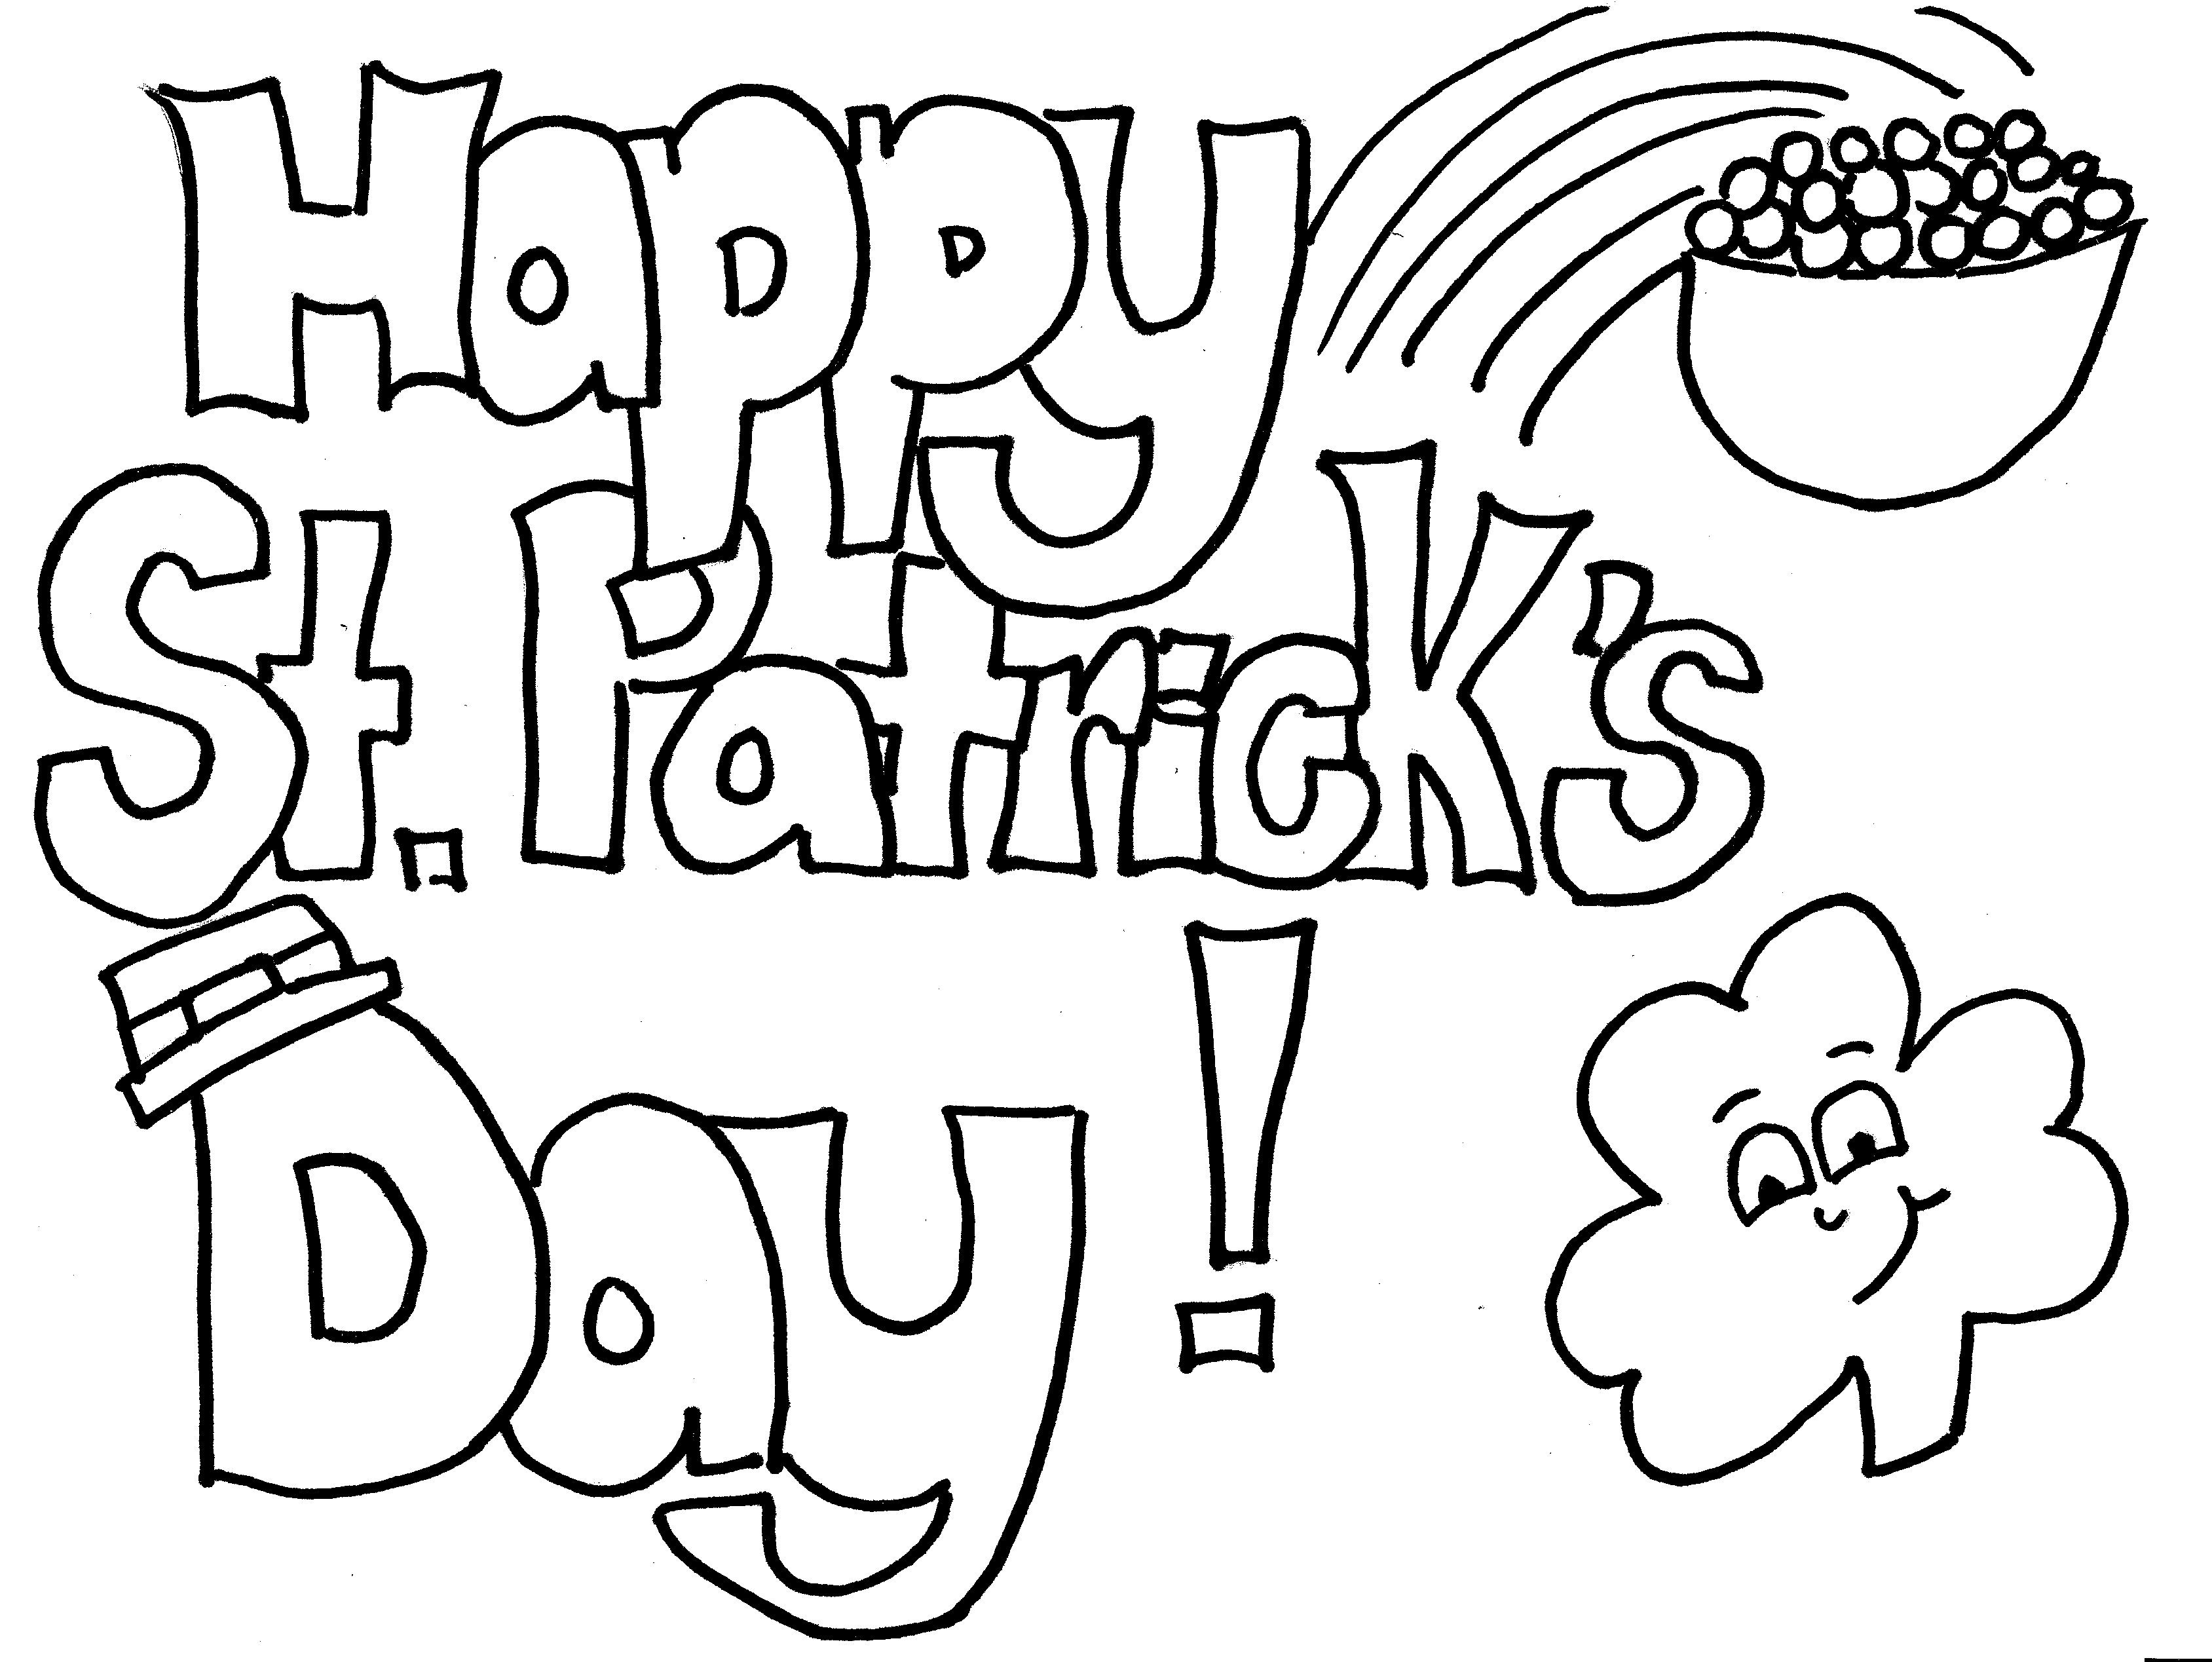 St patricks day color pages | www.veupropia.org